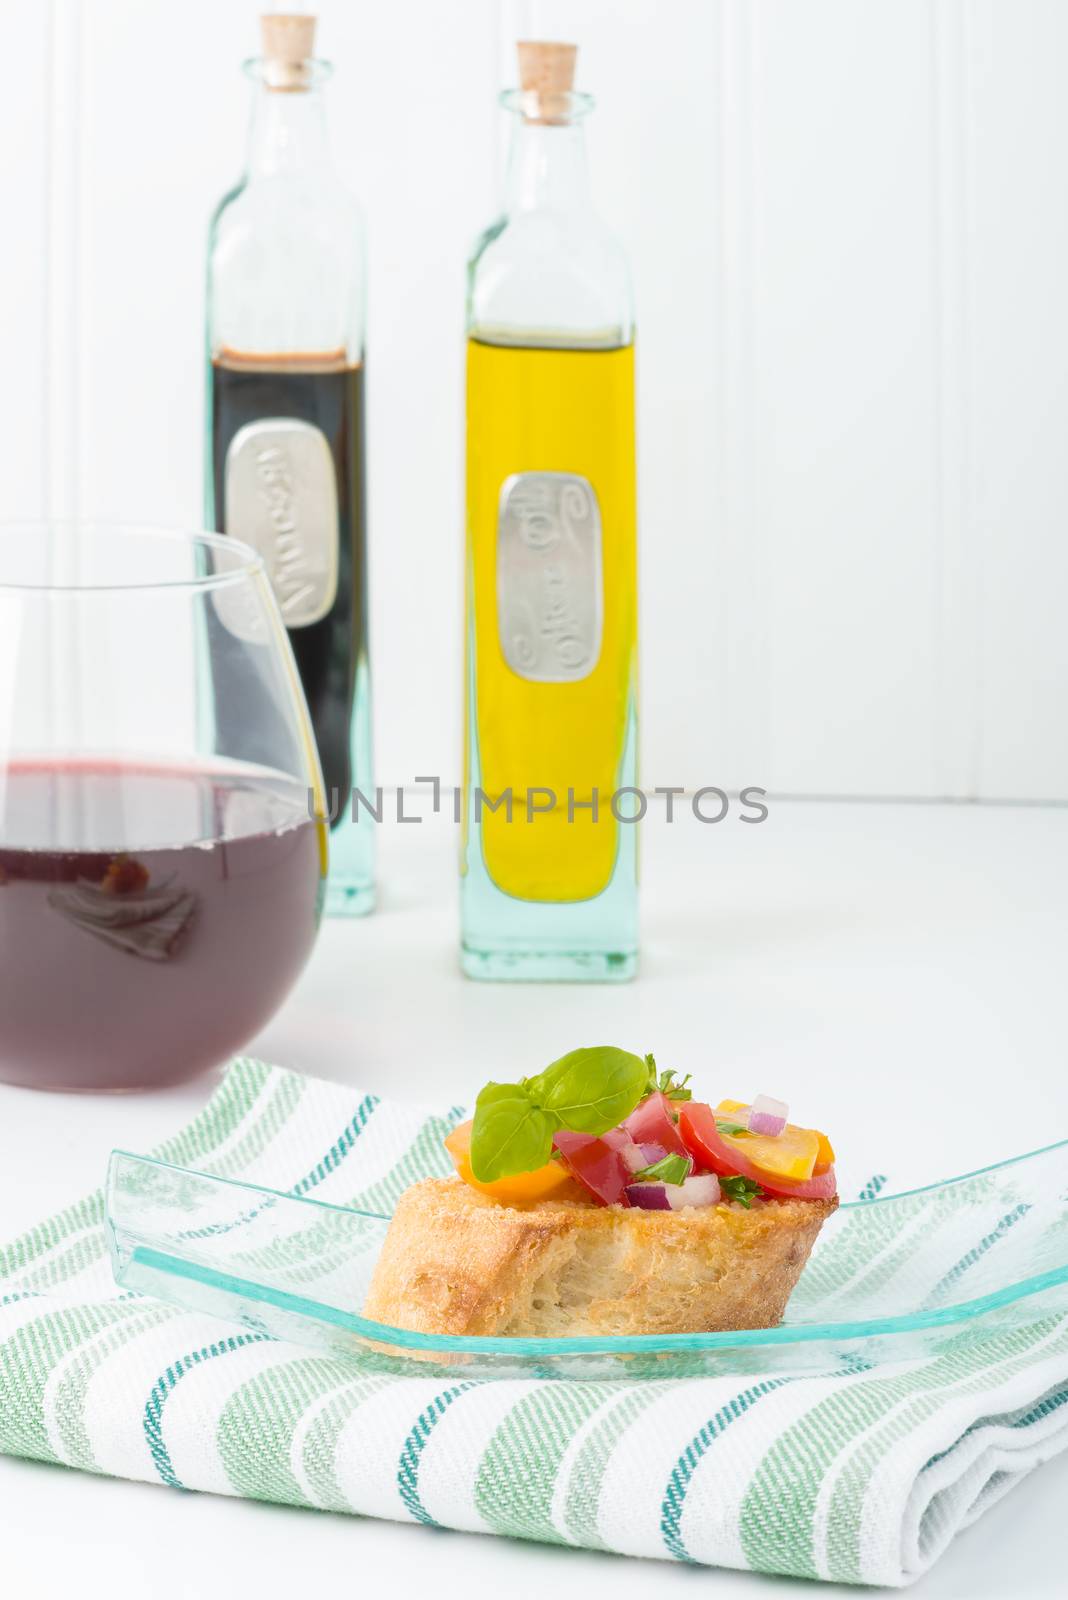 Colorful bruschetta on a glass plate.  Useful for many food service promotional applications.